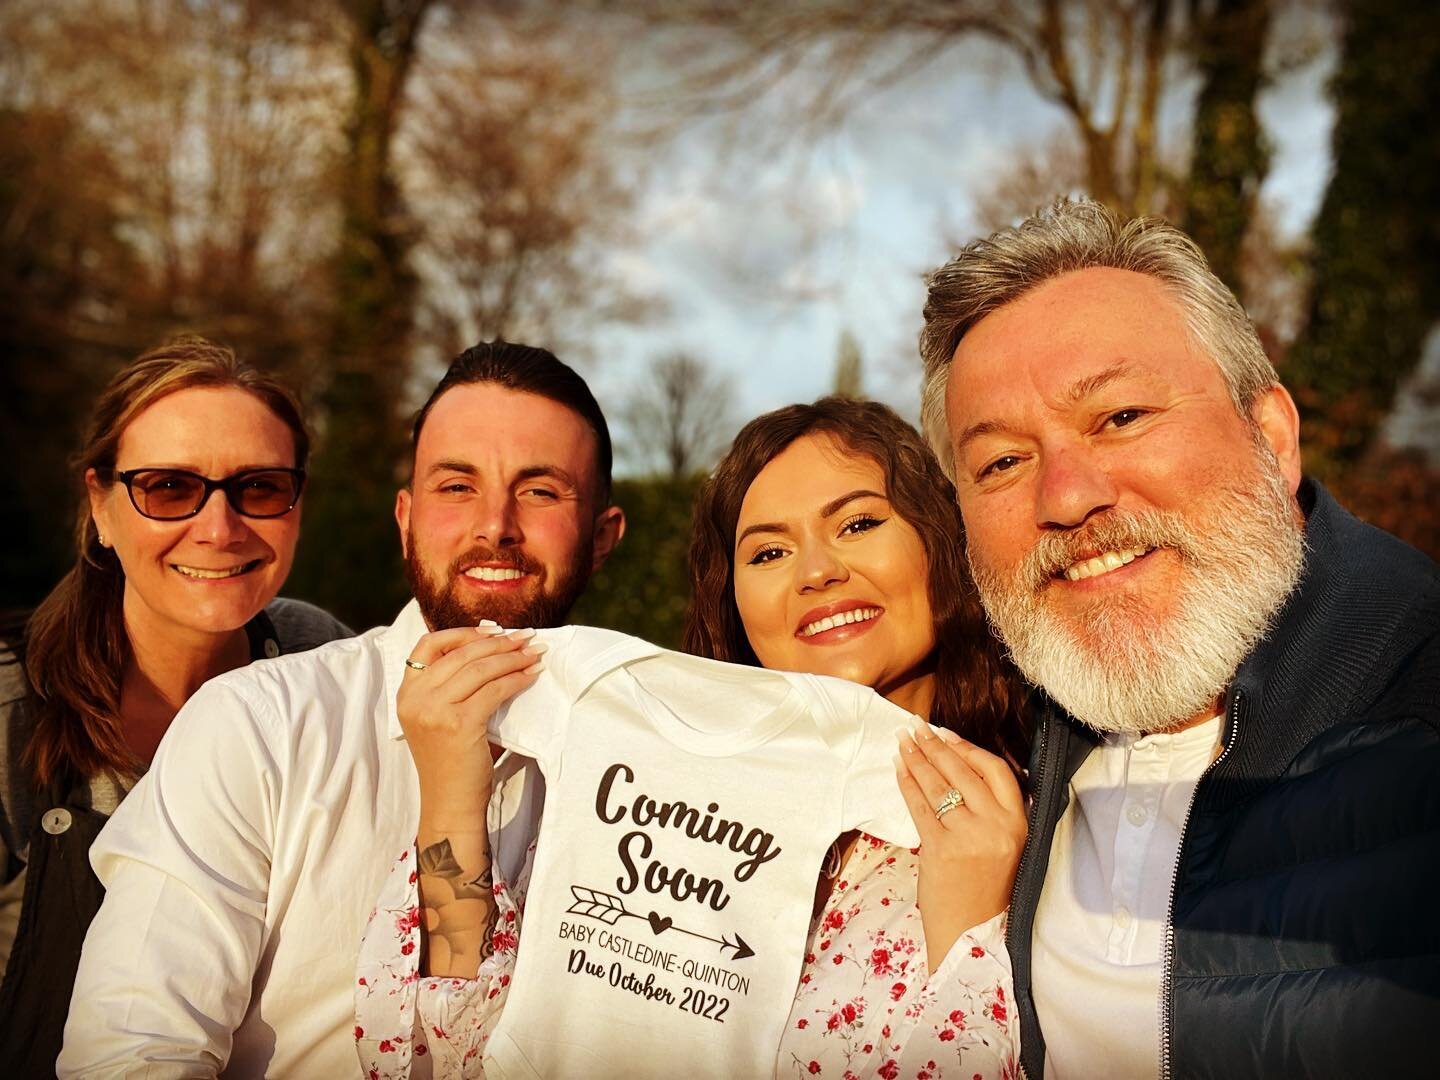 It&rsquo;s not everyday you discover that you&rsquo;re going to be a grandparent. Apparently I am not allowed to be &ldquo;The G-Dog&rdquo;. So pleased for you both ❤️@indiacastledine_quinton @davidcastledine_quinton #grandad #grandma #Gdog #grandpa